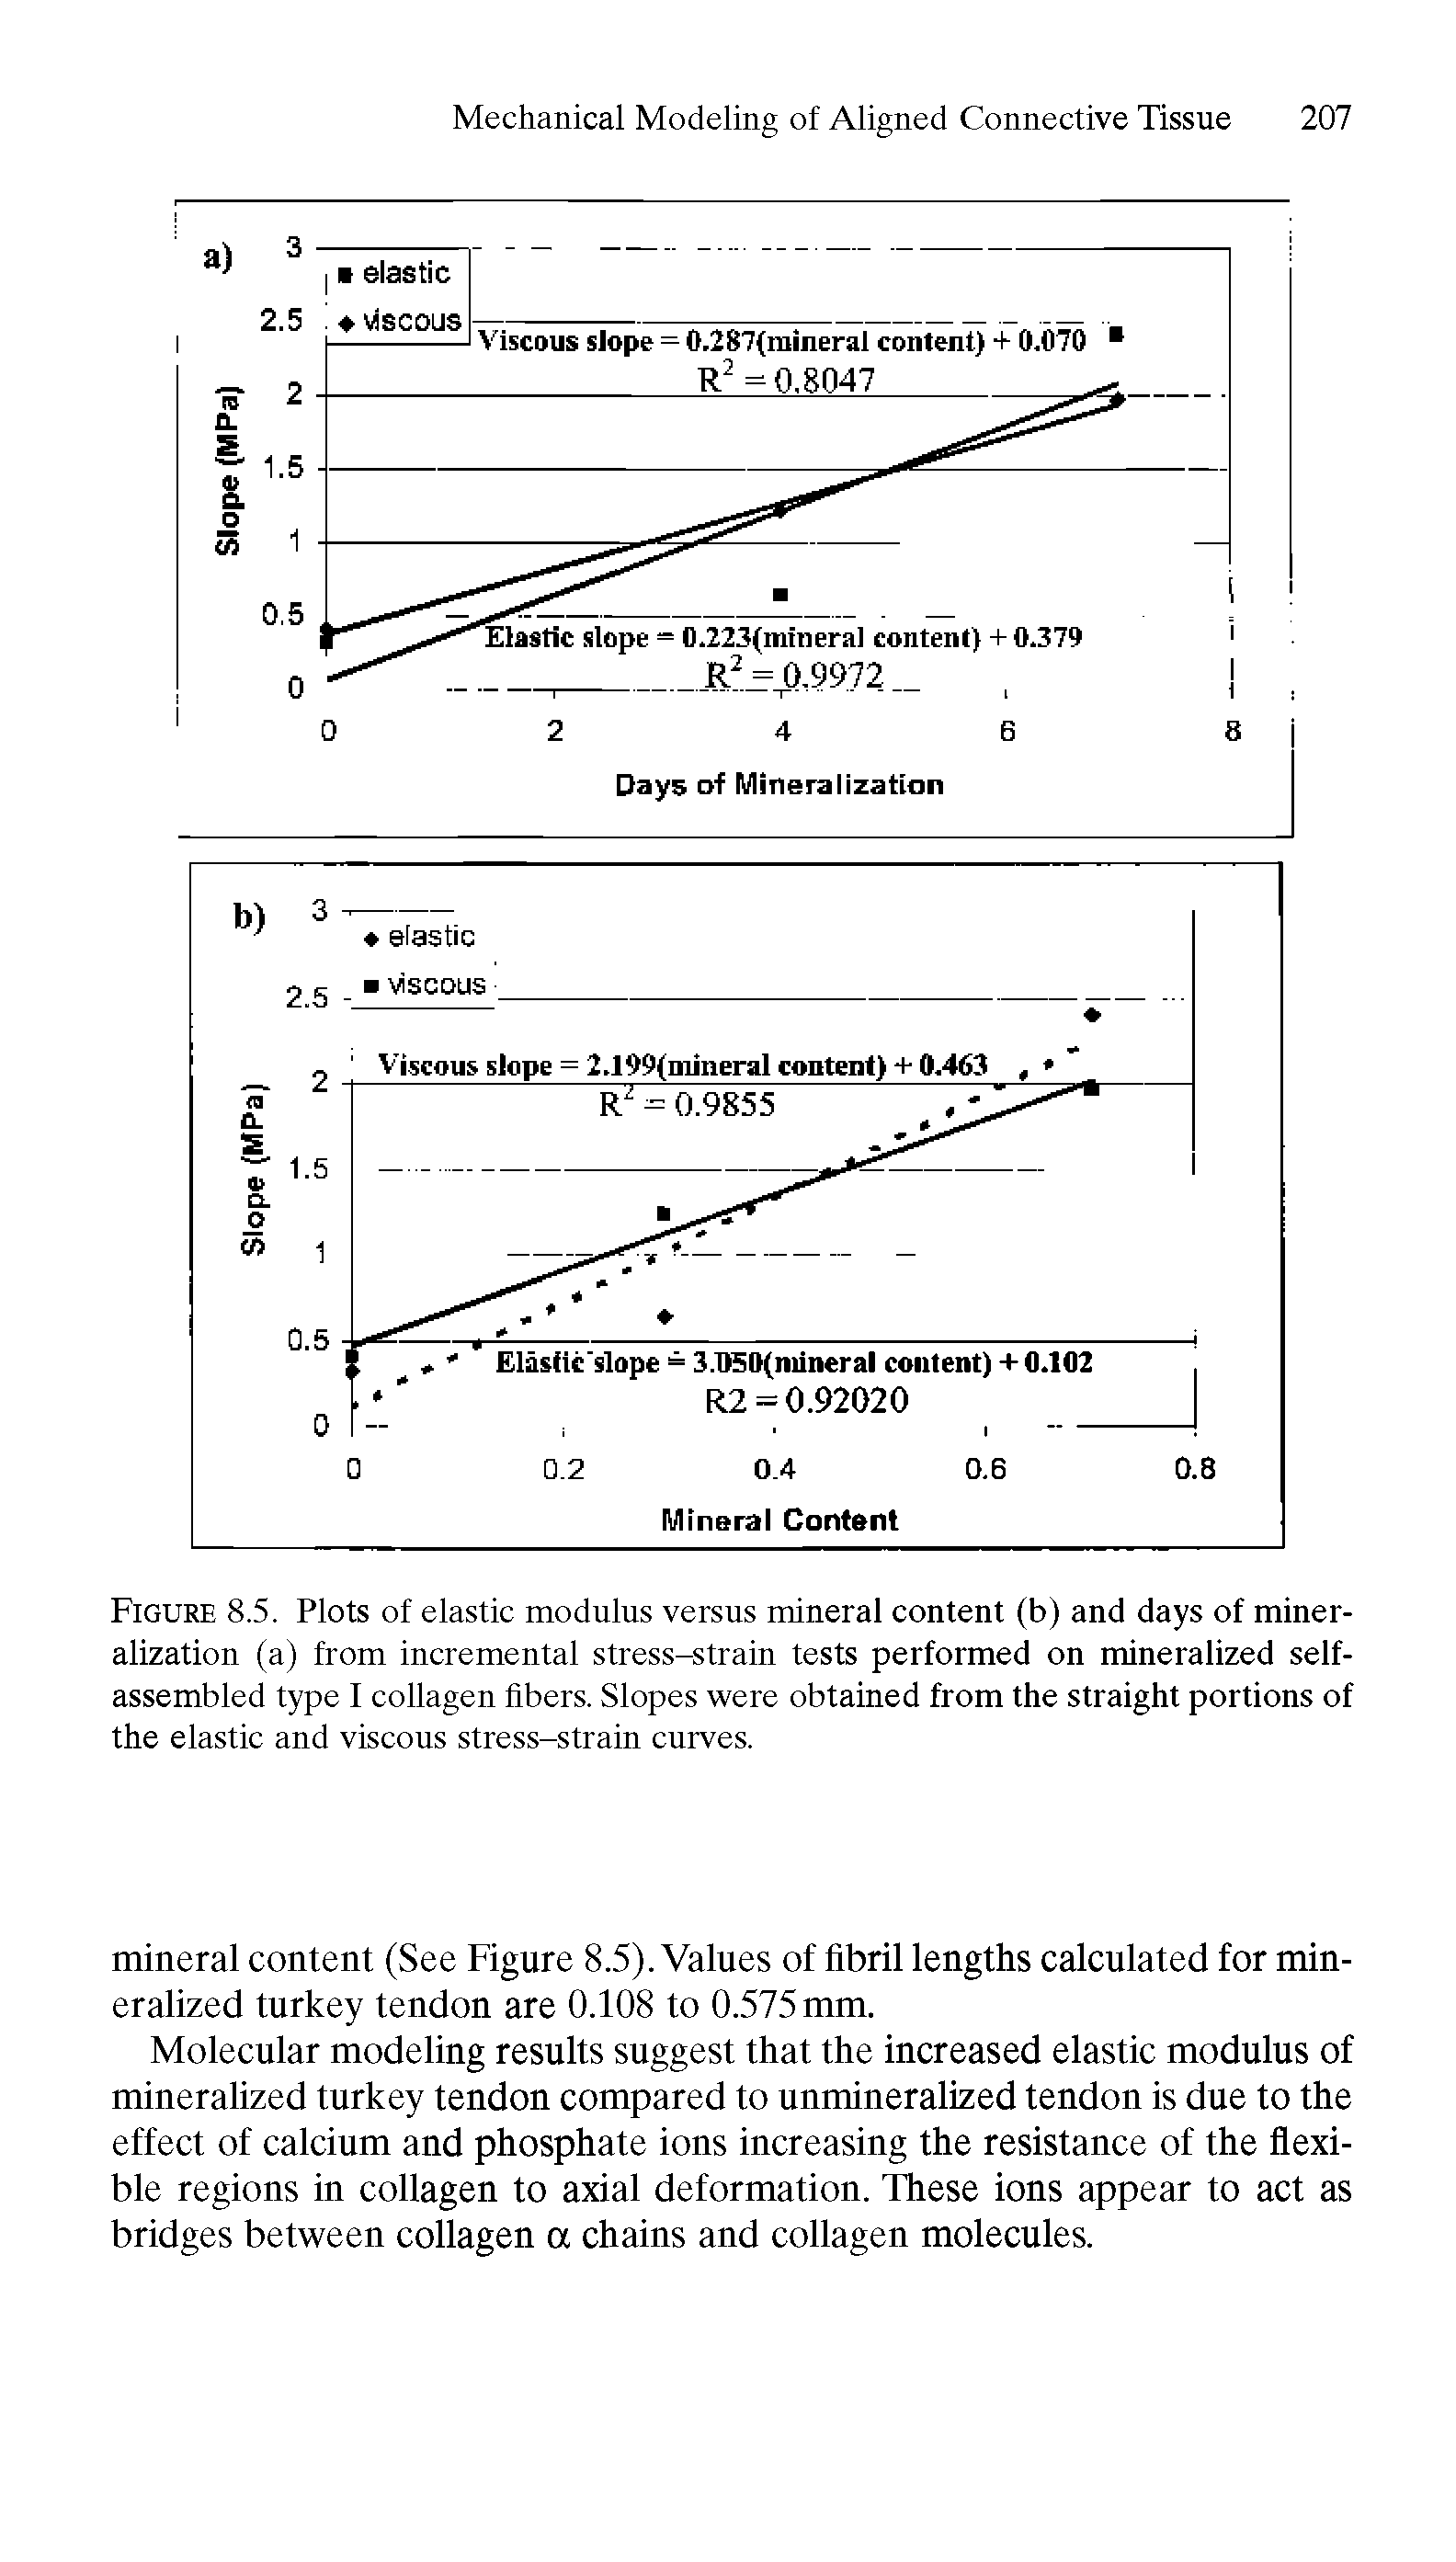 Figure 8.5. Plots of elastic modulus versus mineral content (b) and days of mineralization (a) from incremental stress-strain tests performed on mineralized self-assembled type I collagen fibers. Slopes were obtained from the straight portions of the elastic and viscous stress-strain curves.